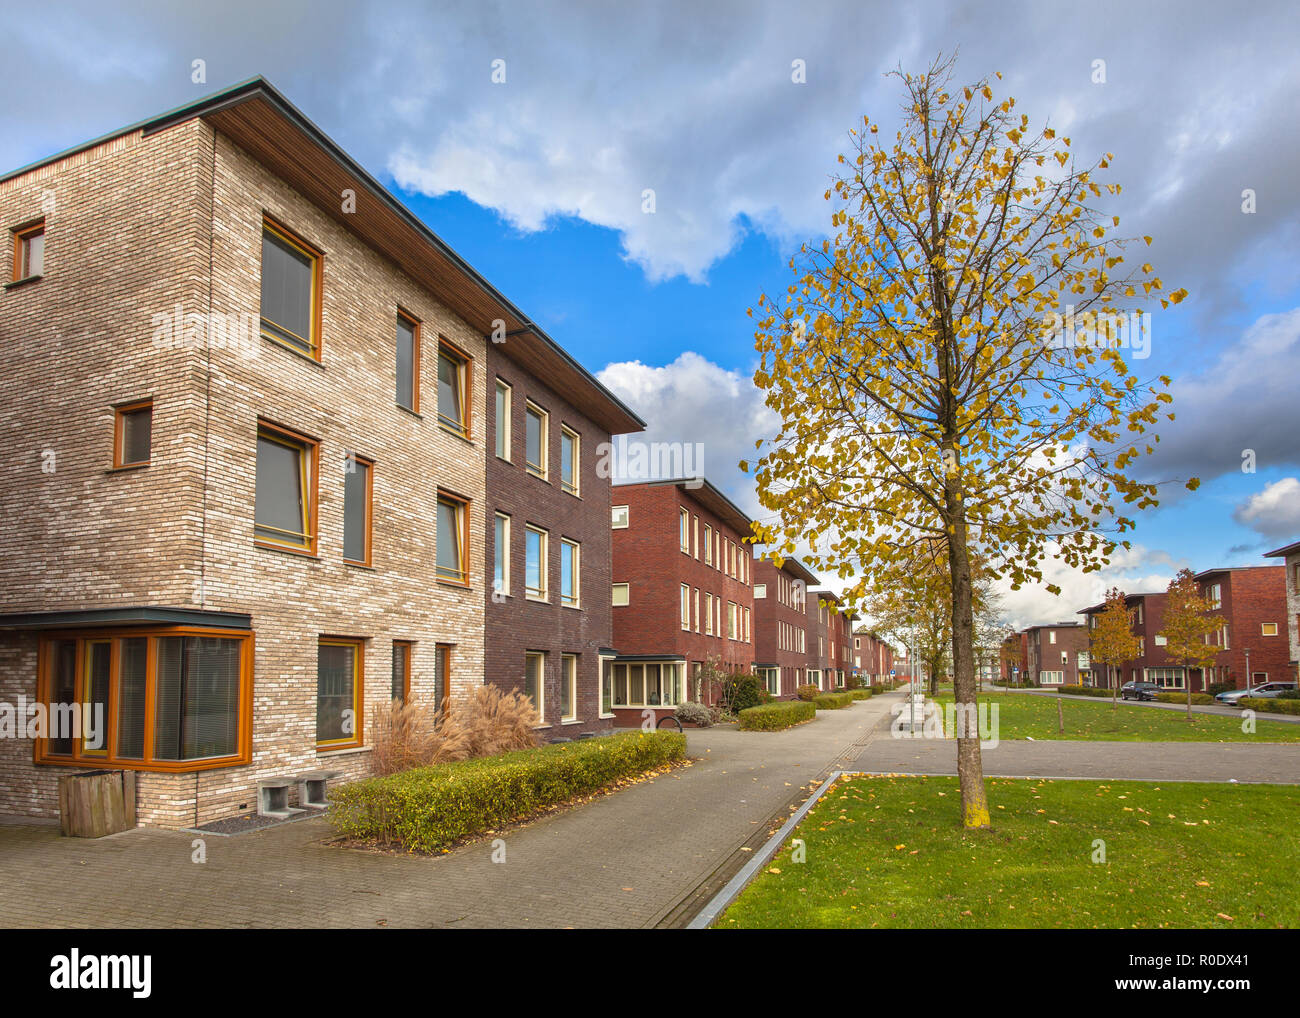 Large Modern Middle Class Terraced Houses in a Spacious Suburban Area Stock Photo